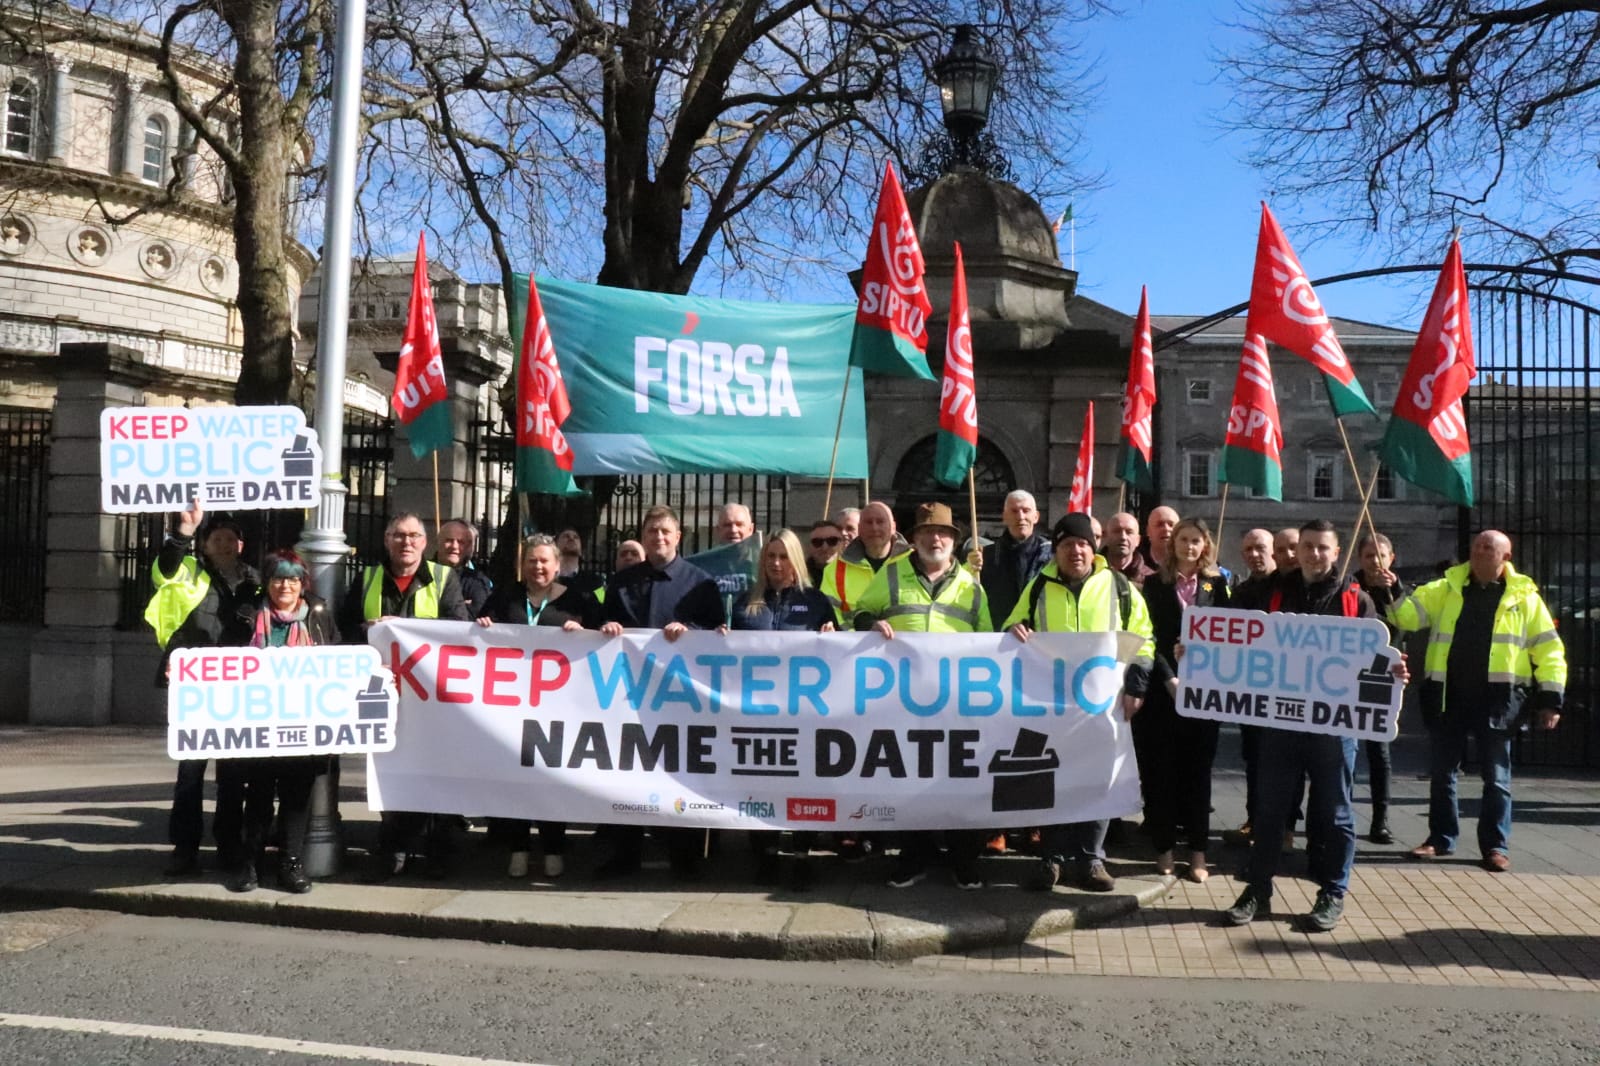 Fórsa national secretary Richy Carrothers said that a referendum would help protect Irish water services from any future attempt at privatisation by providing a constitutional guarantee of public ownership.